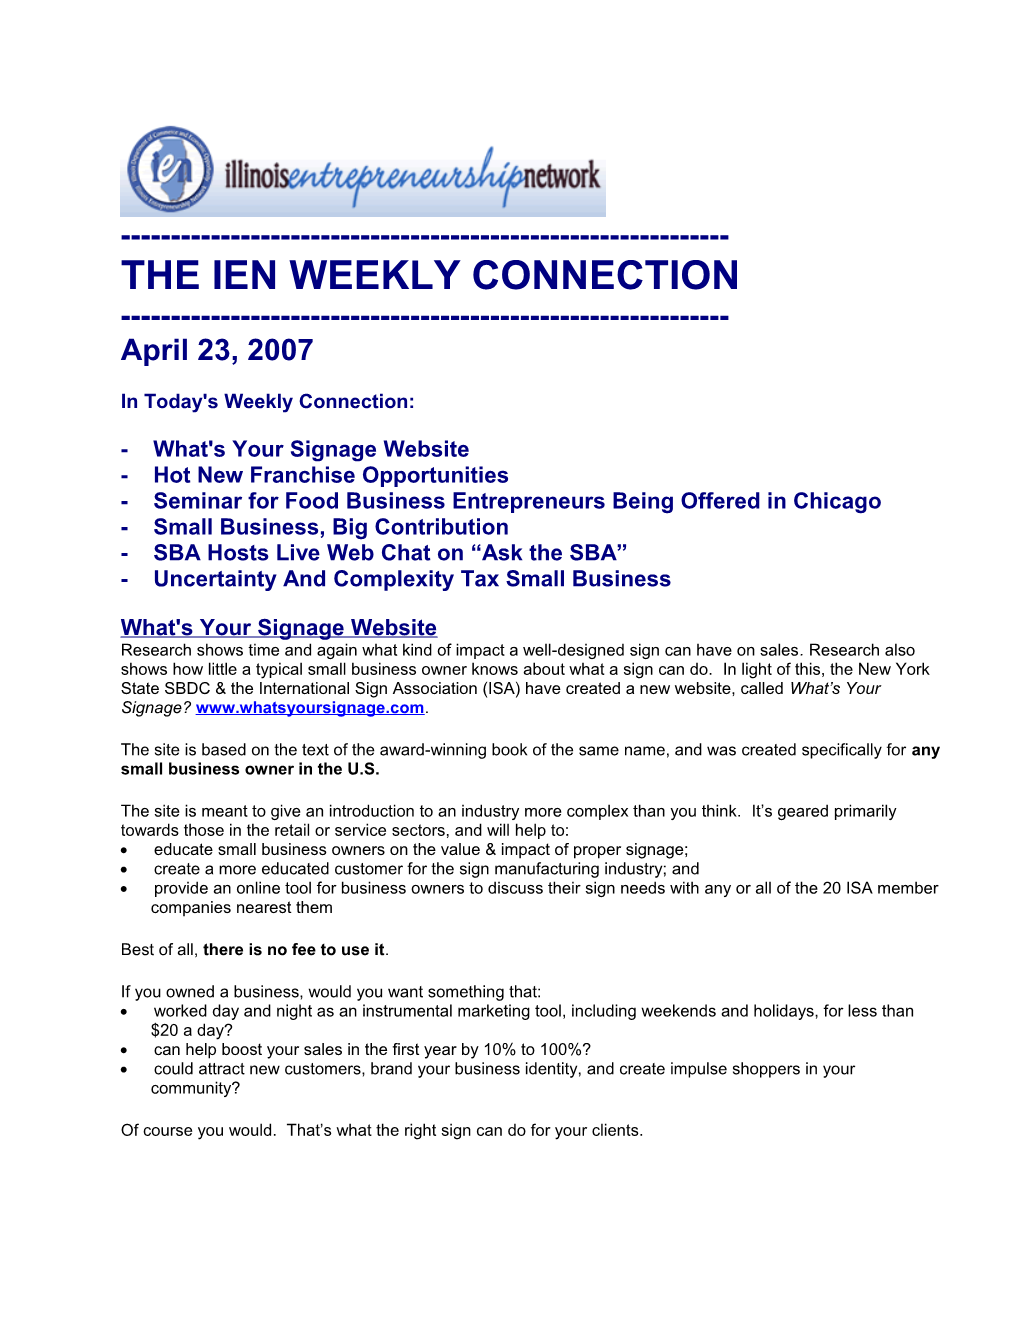 The Ien Weekly Connection